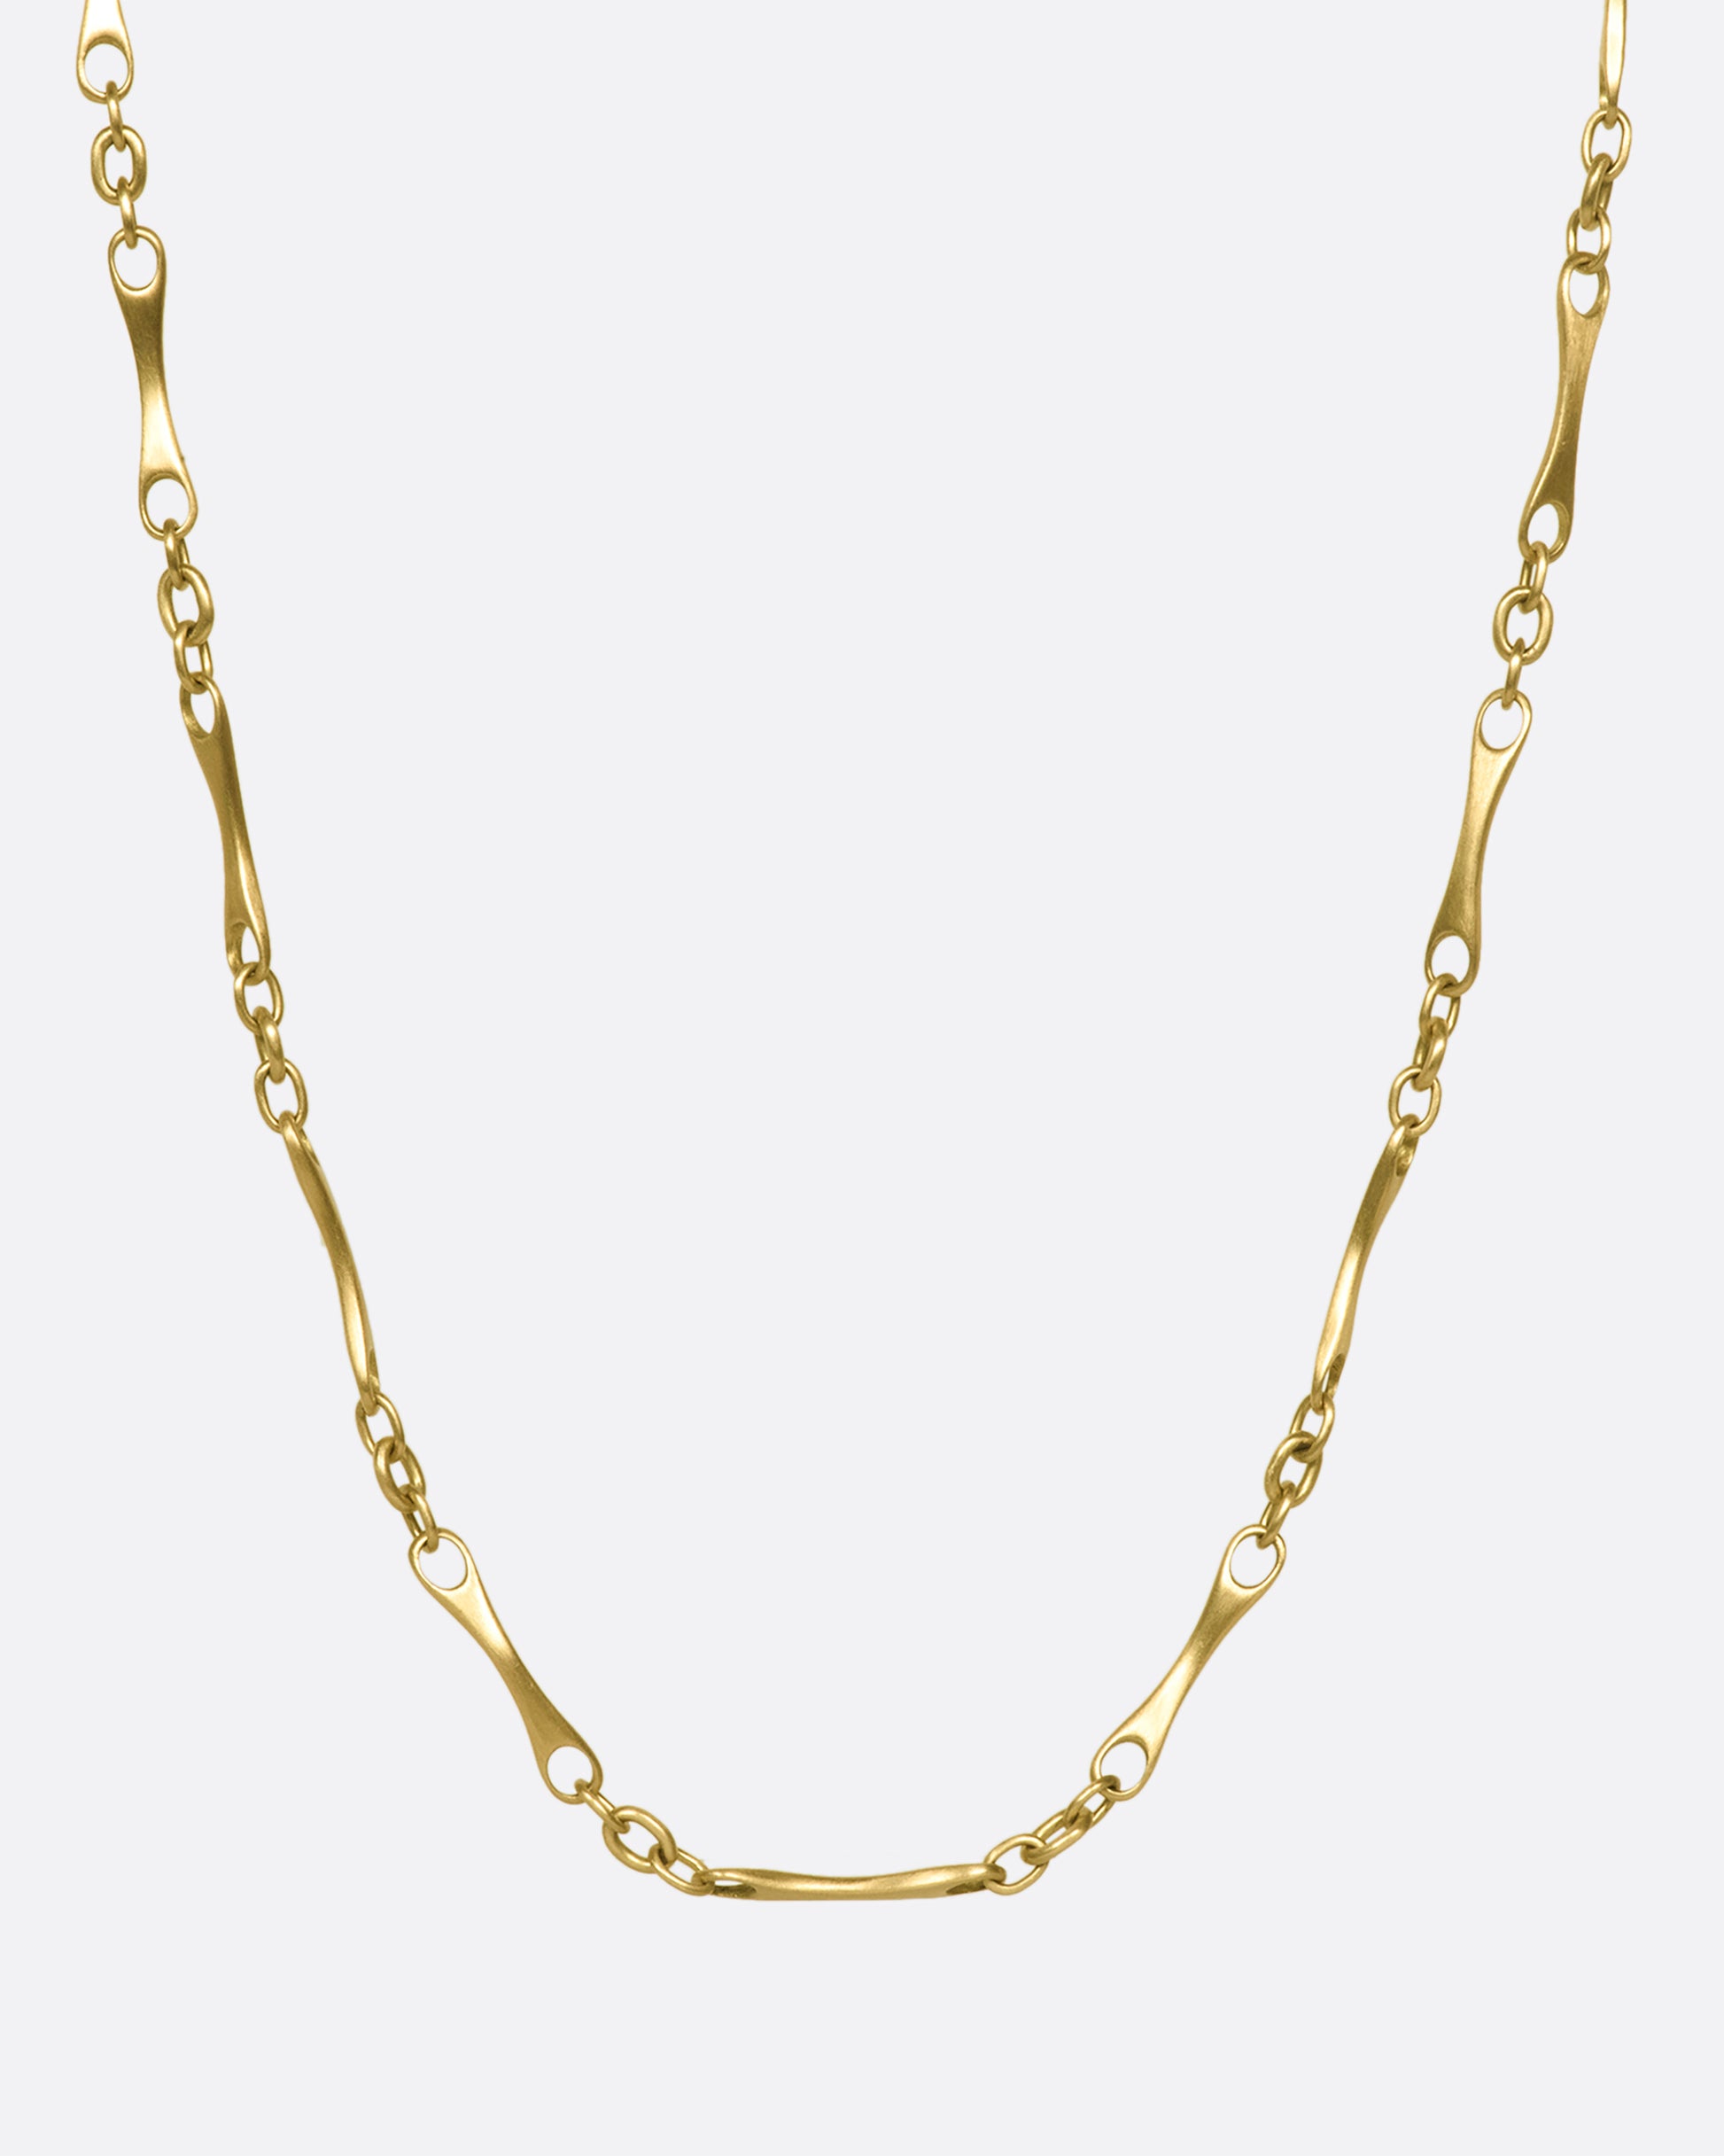 A gold necklace with elongated links with circular cut outs on each end.